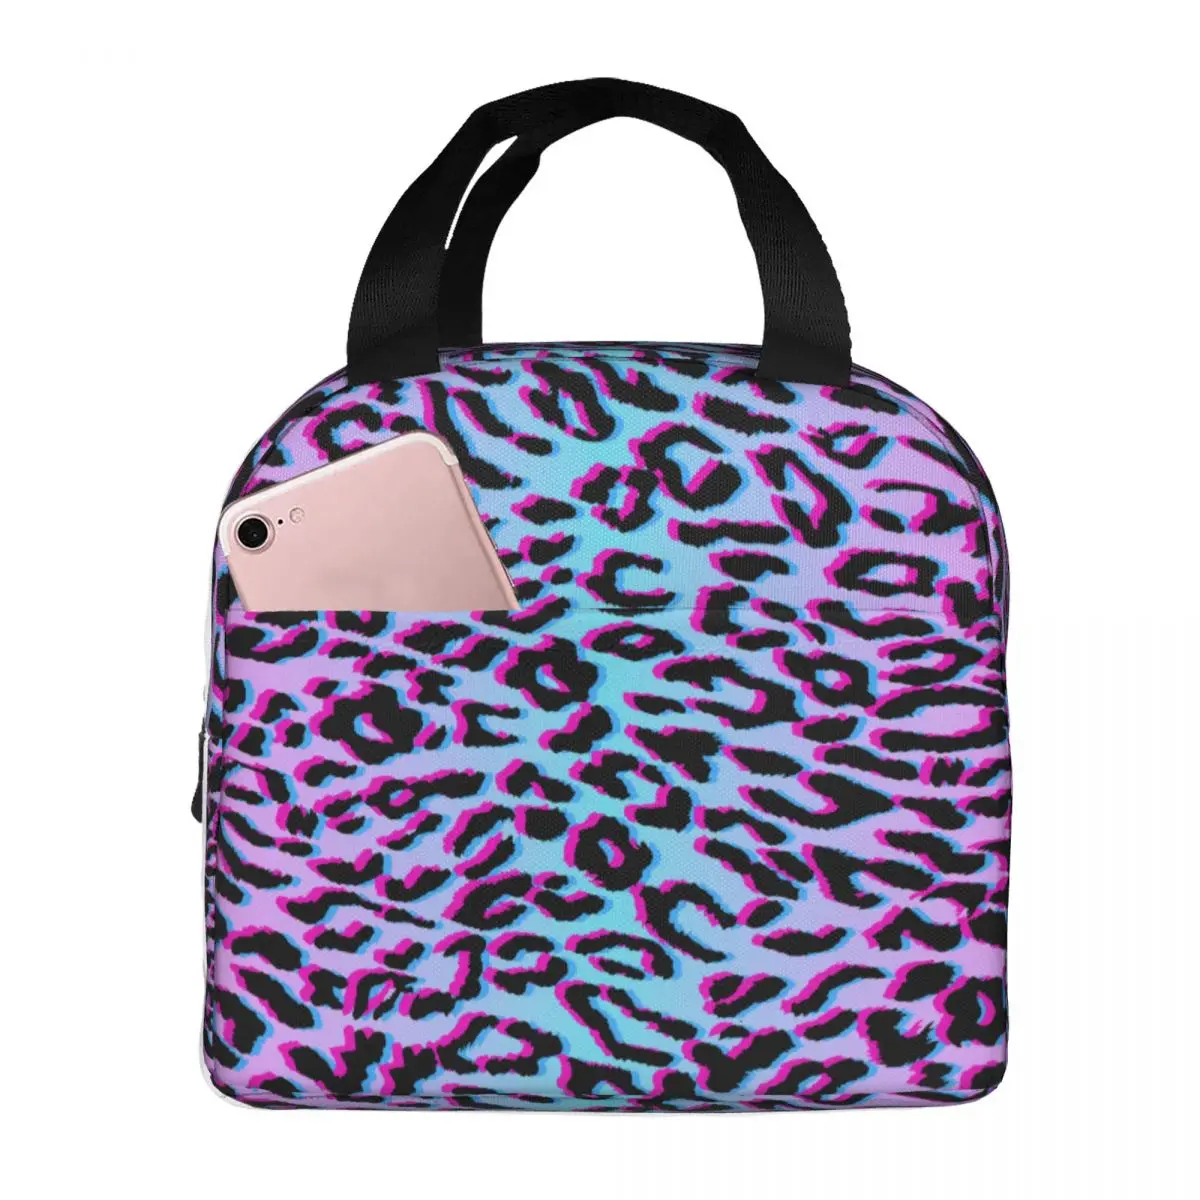 Neon Leopard Lunch Bags Portable Insulated Canvas Cooler Thermal Picnic Tote for Women Kids